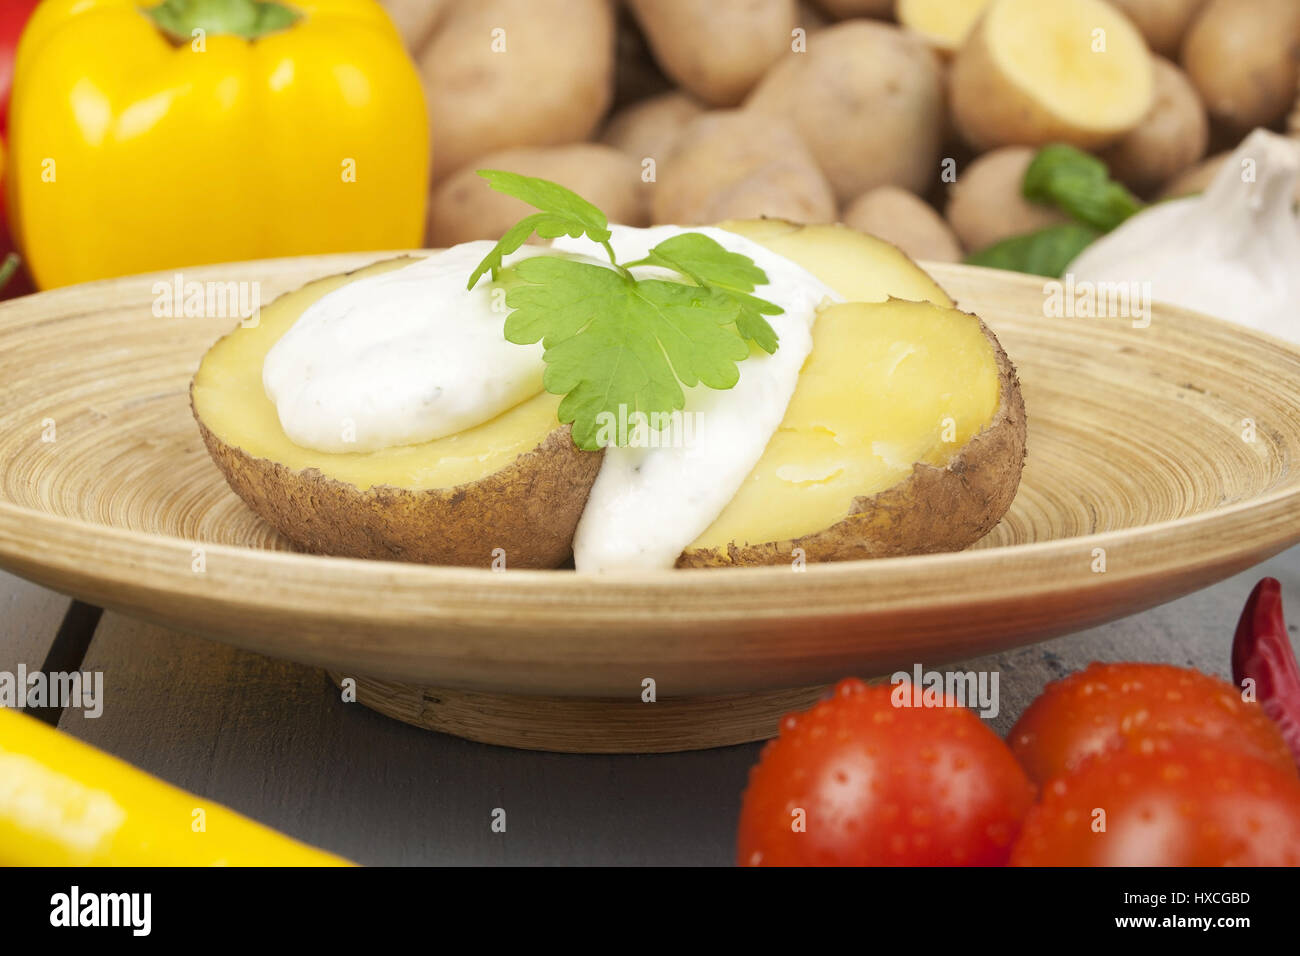 Potatoes with curd, Potatoes with cottage cheese |, Kartoffeln mit Quark |Potatoes with cottage cheese| Stock Photo